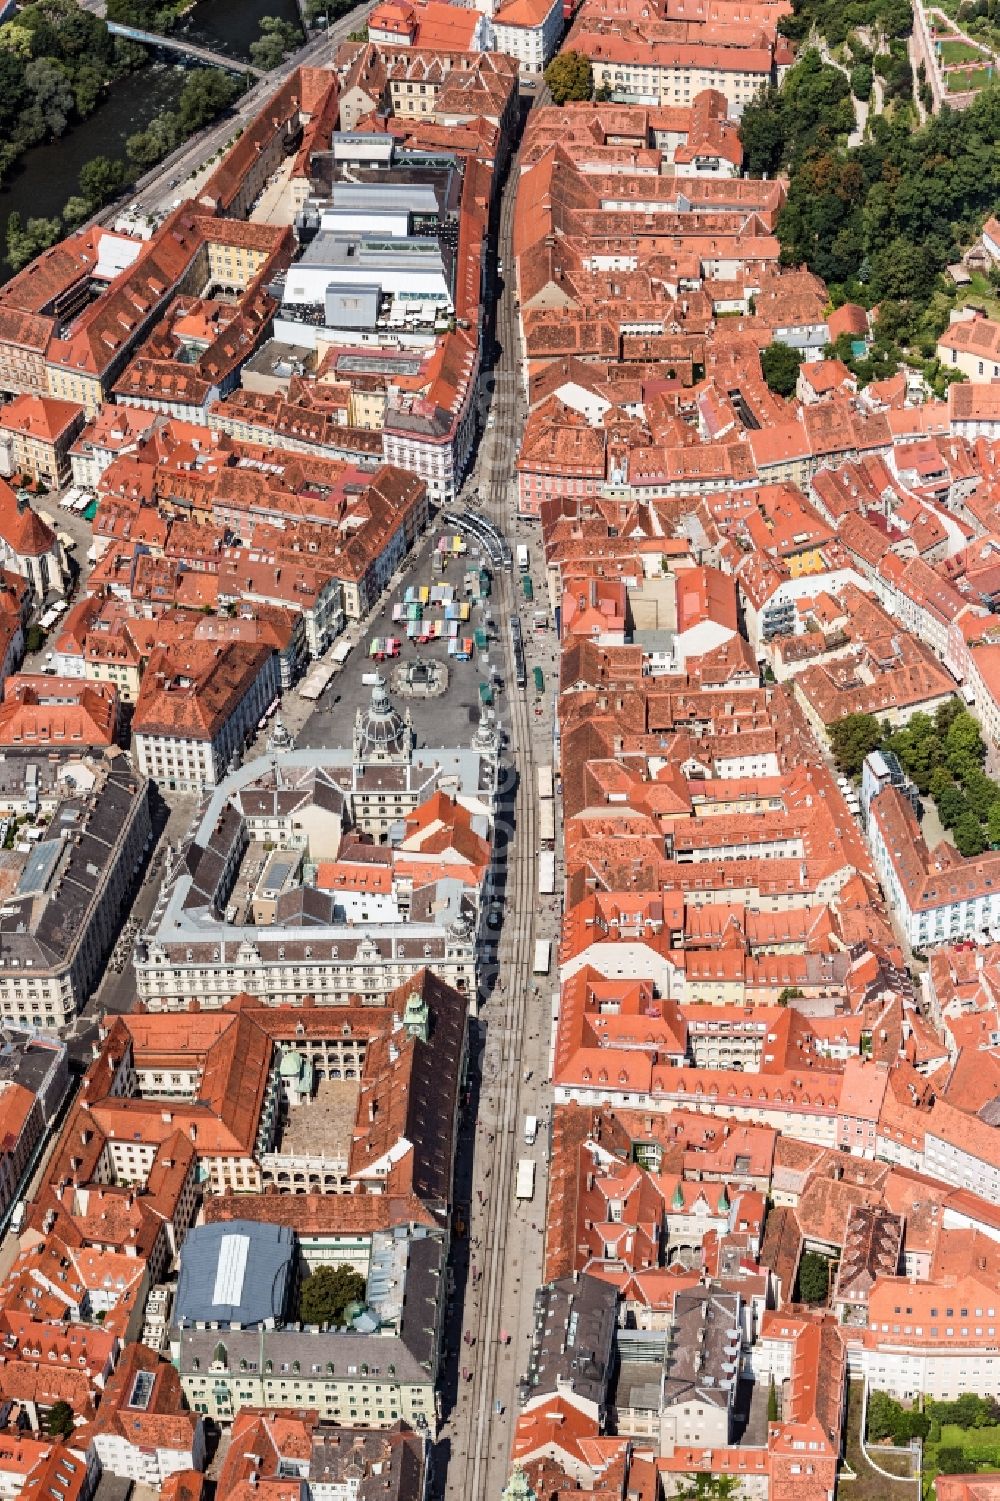 Graz from above - Old Town area and city center in Graz in Steiermark, Austria